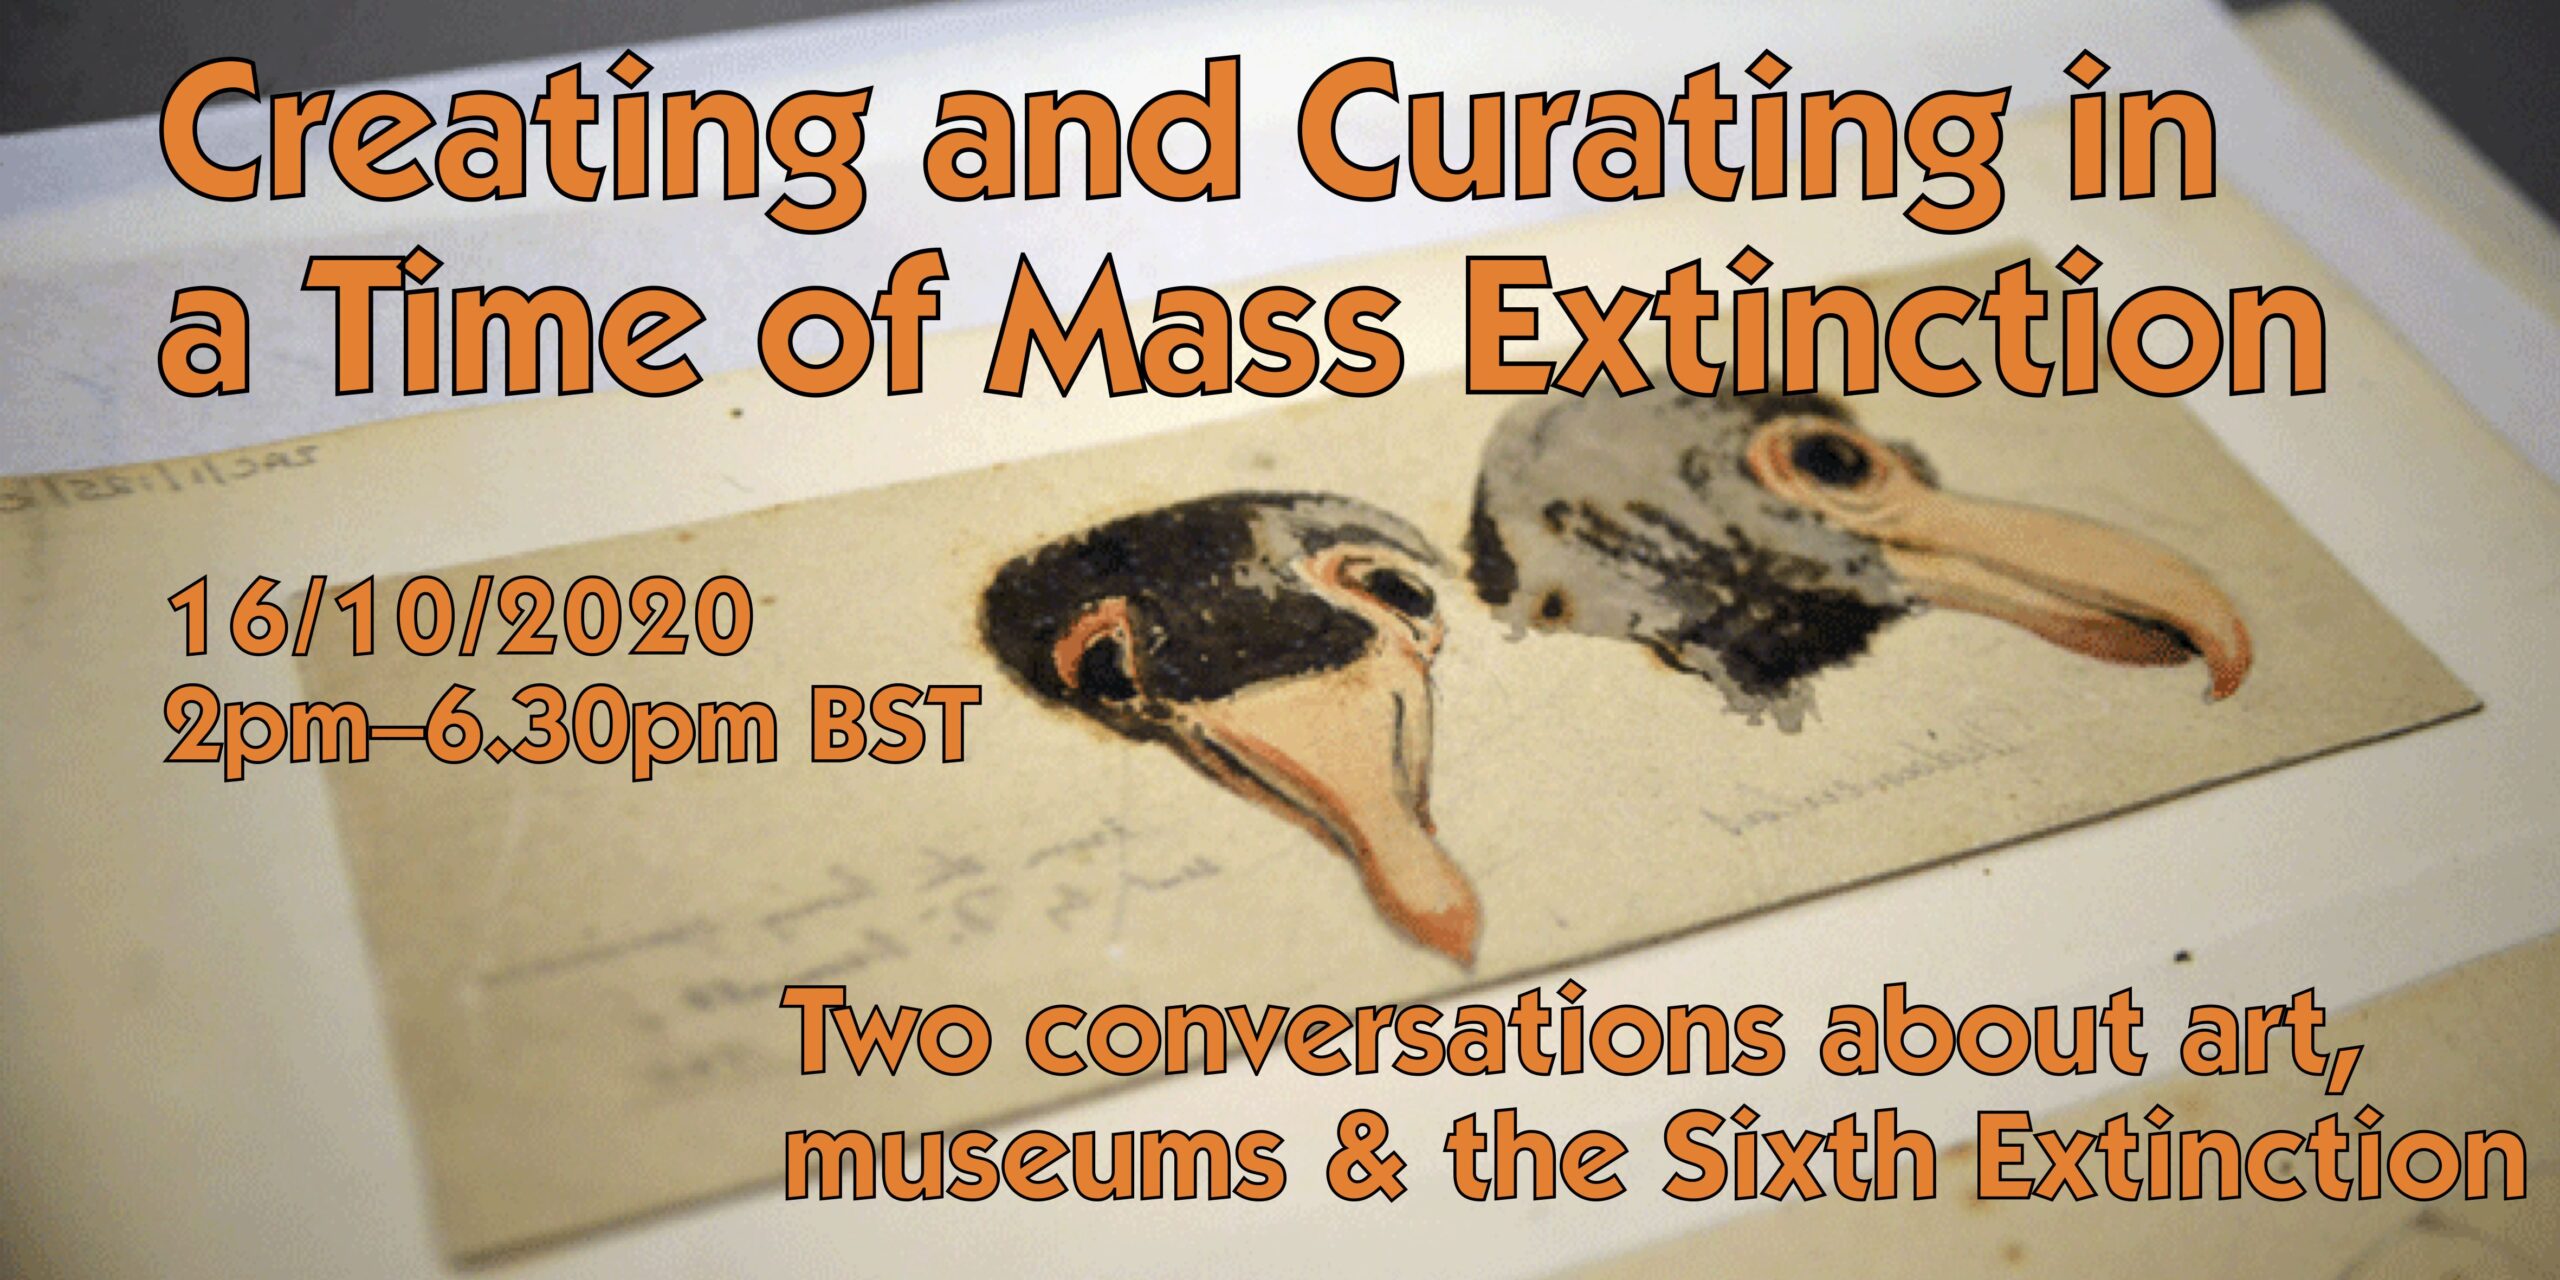 Creating and Curating in a Time of Mass Extinction